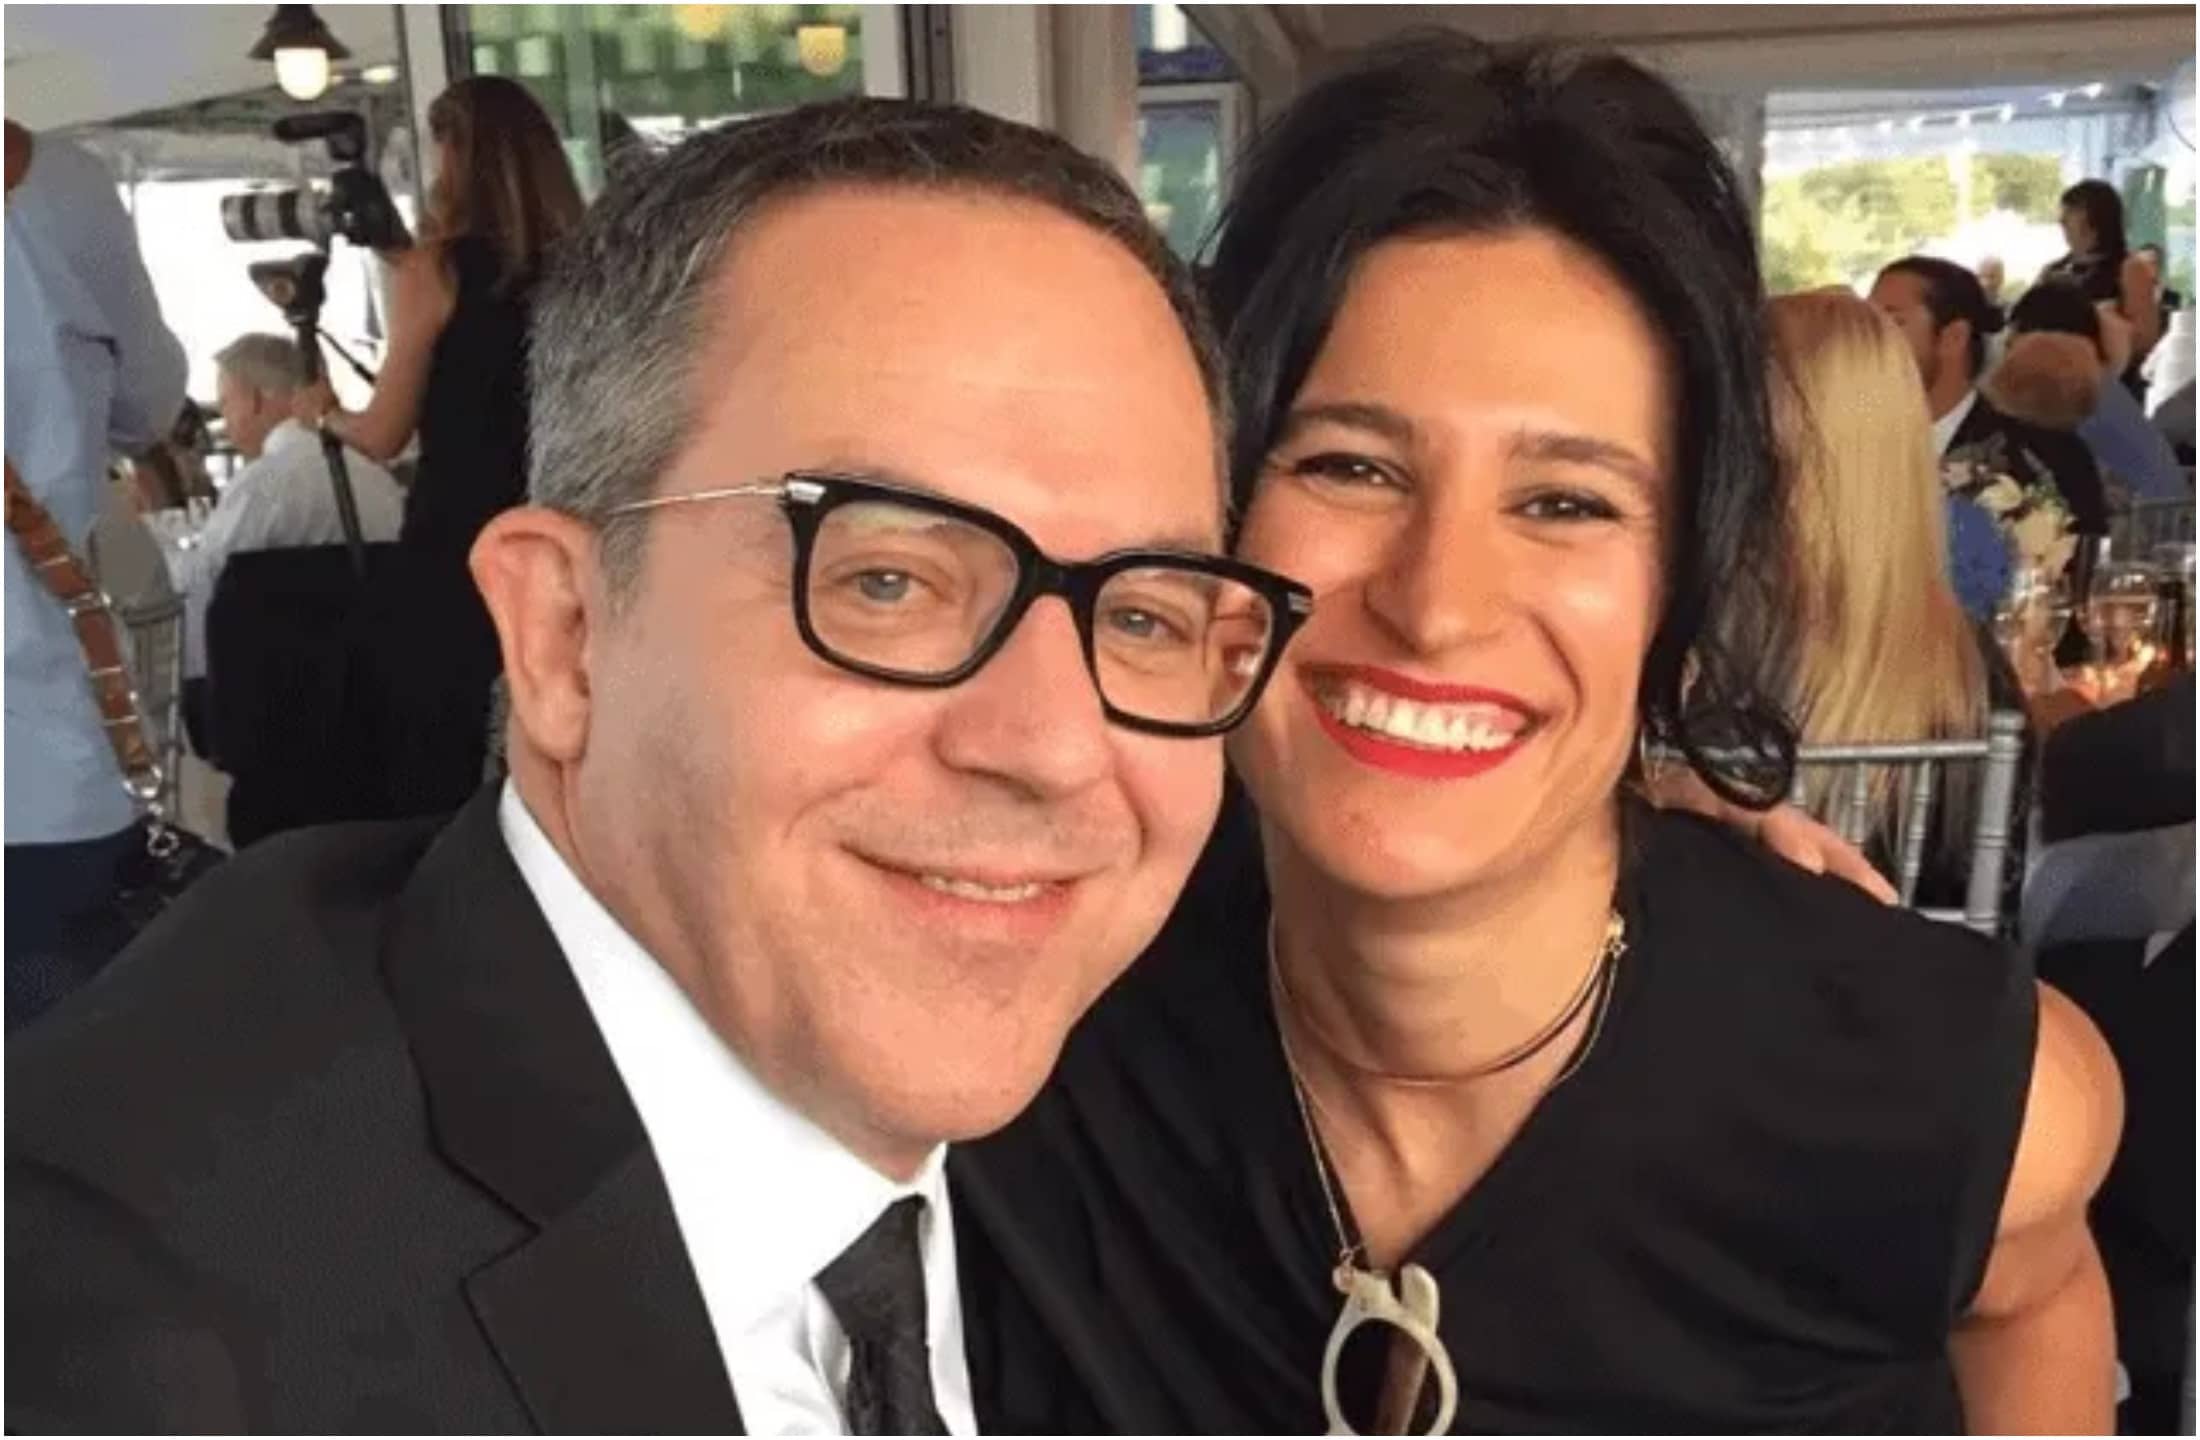 Greg Gutfeld with his wife Elena Moussa at an event